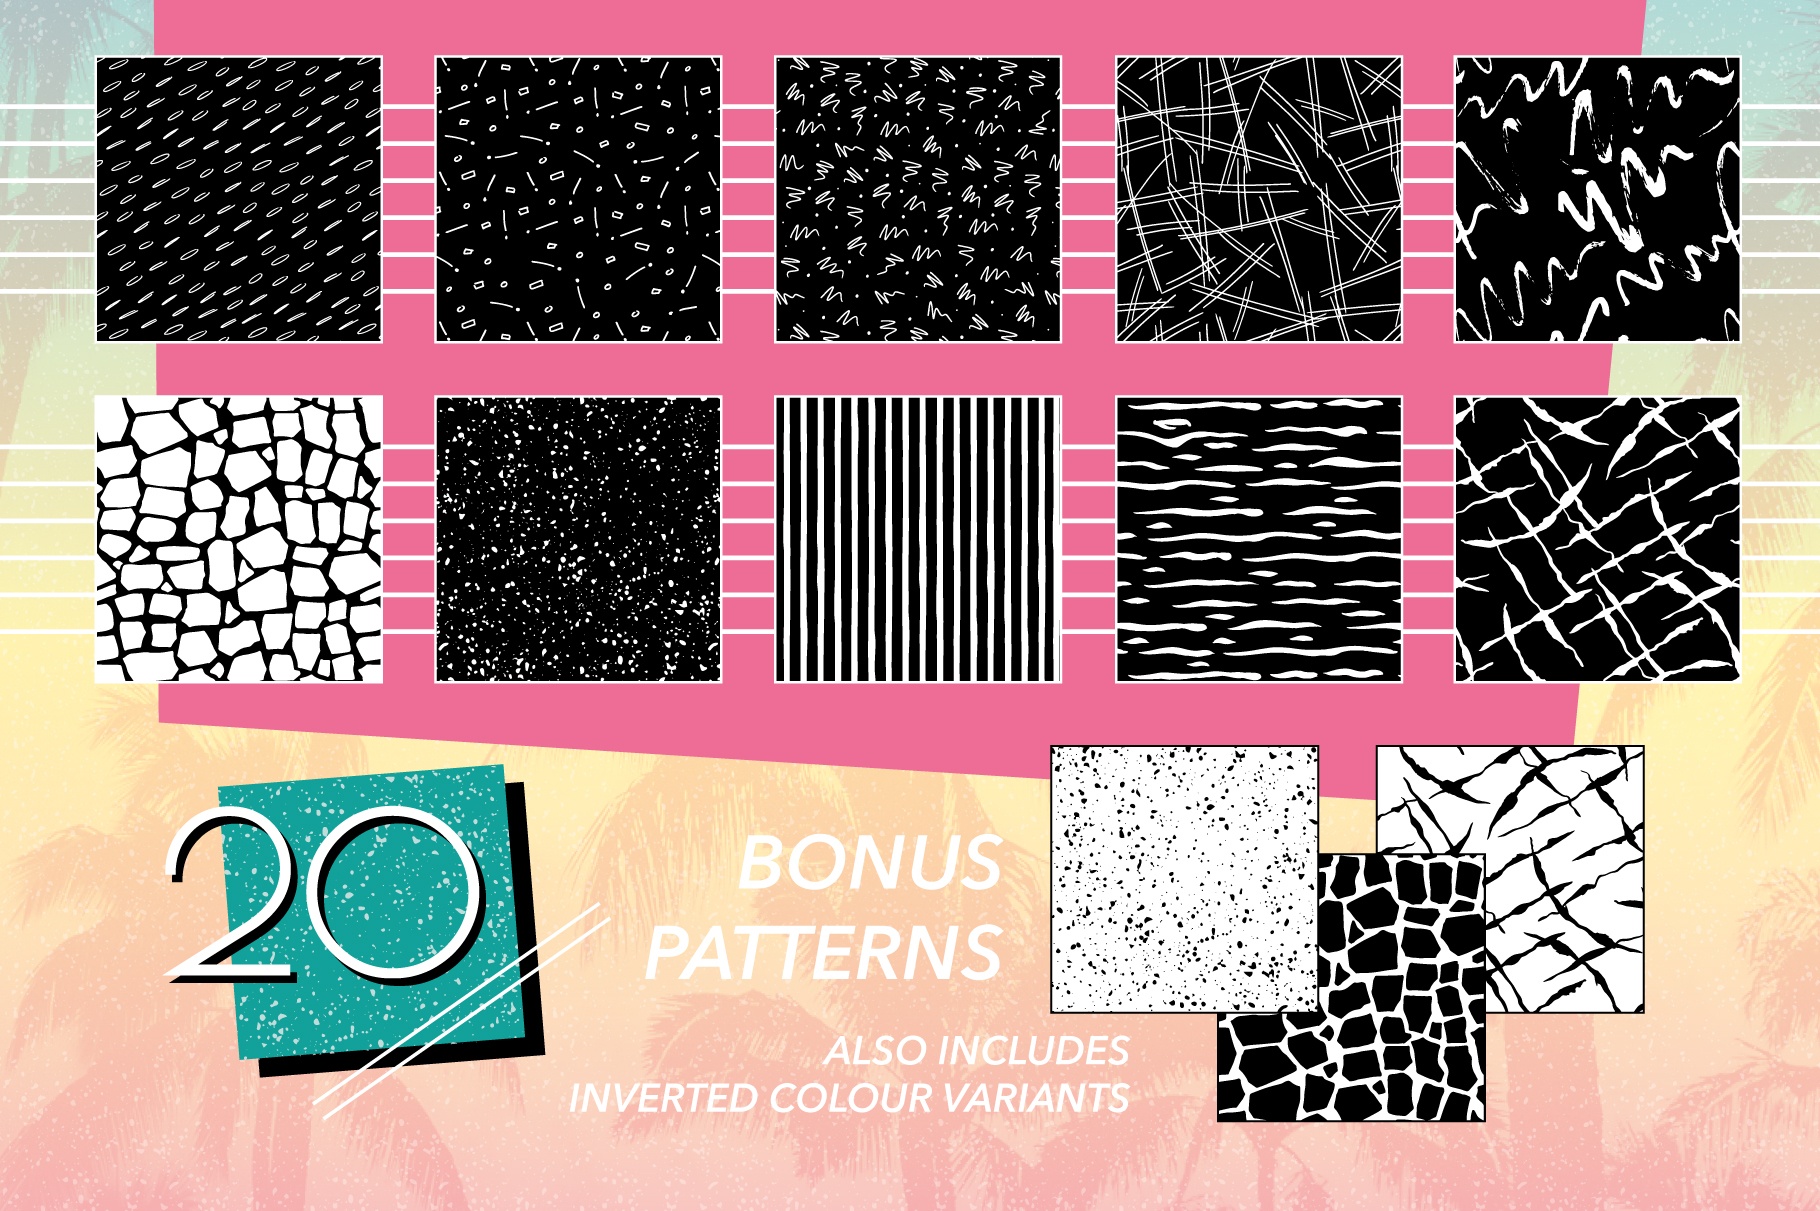 1980s Pattern Designs for Patterns and Fabrics - Wingsart Studio